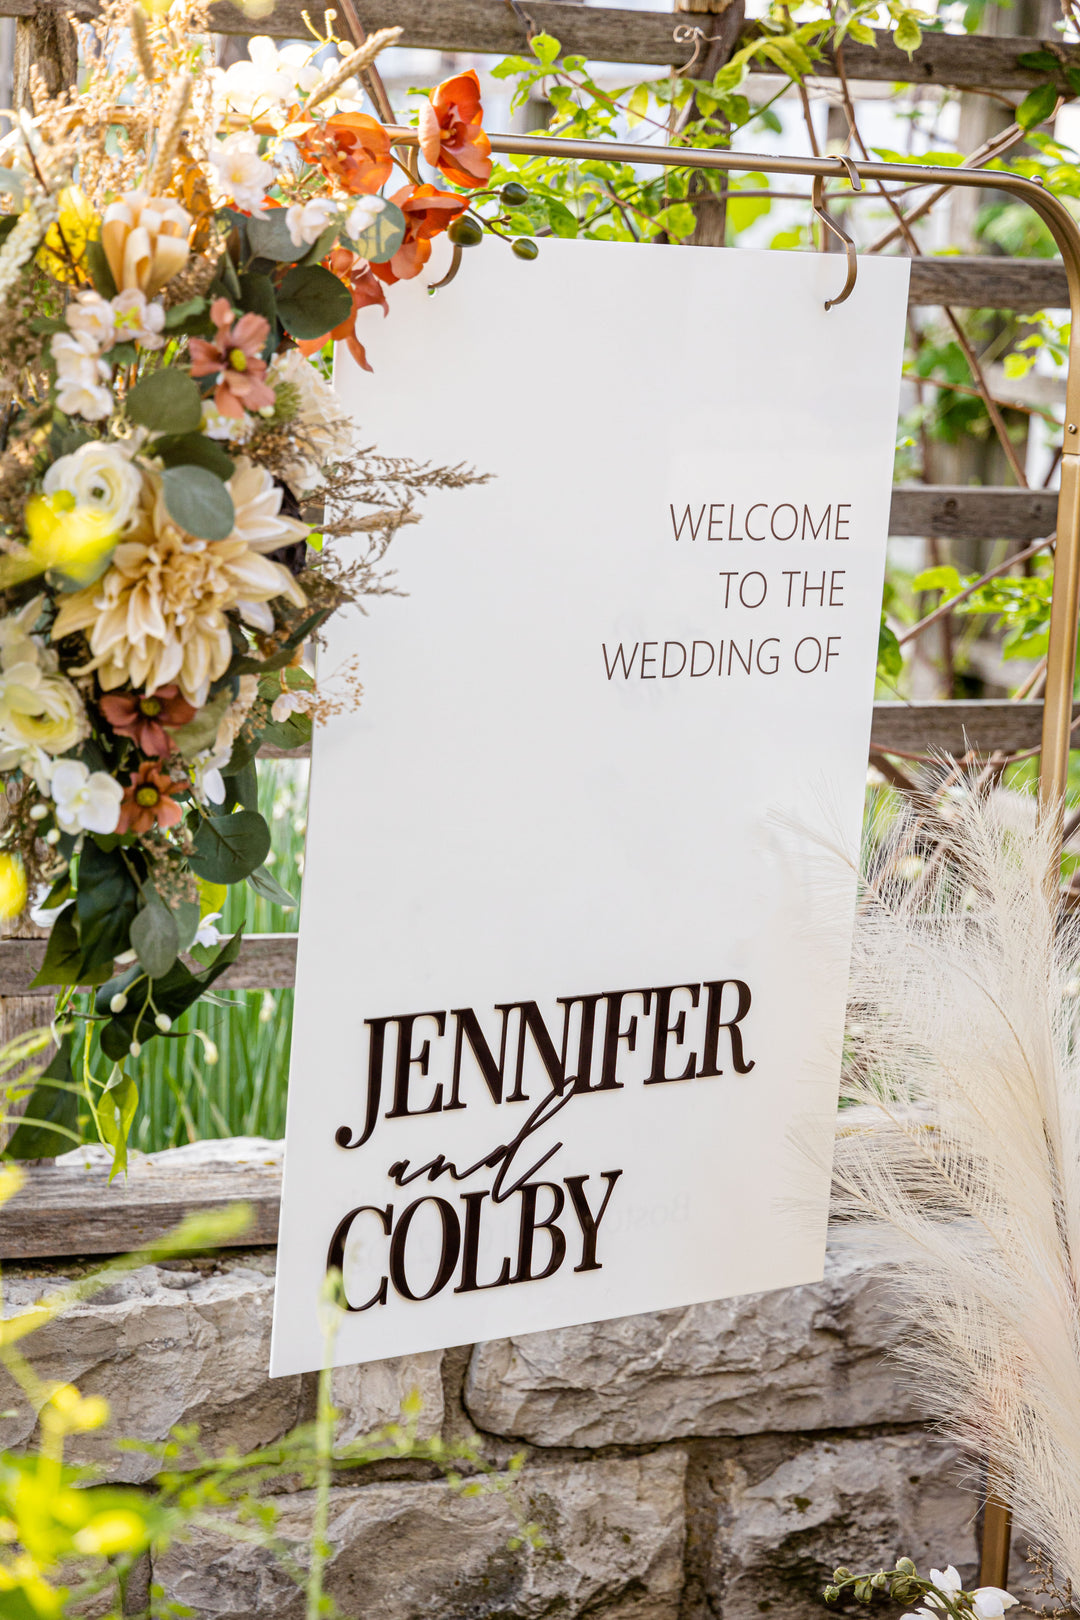 3D Acrylic Welcome Wedding Sign. Laser Welcome - MagicWinter